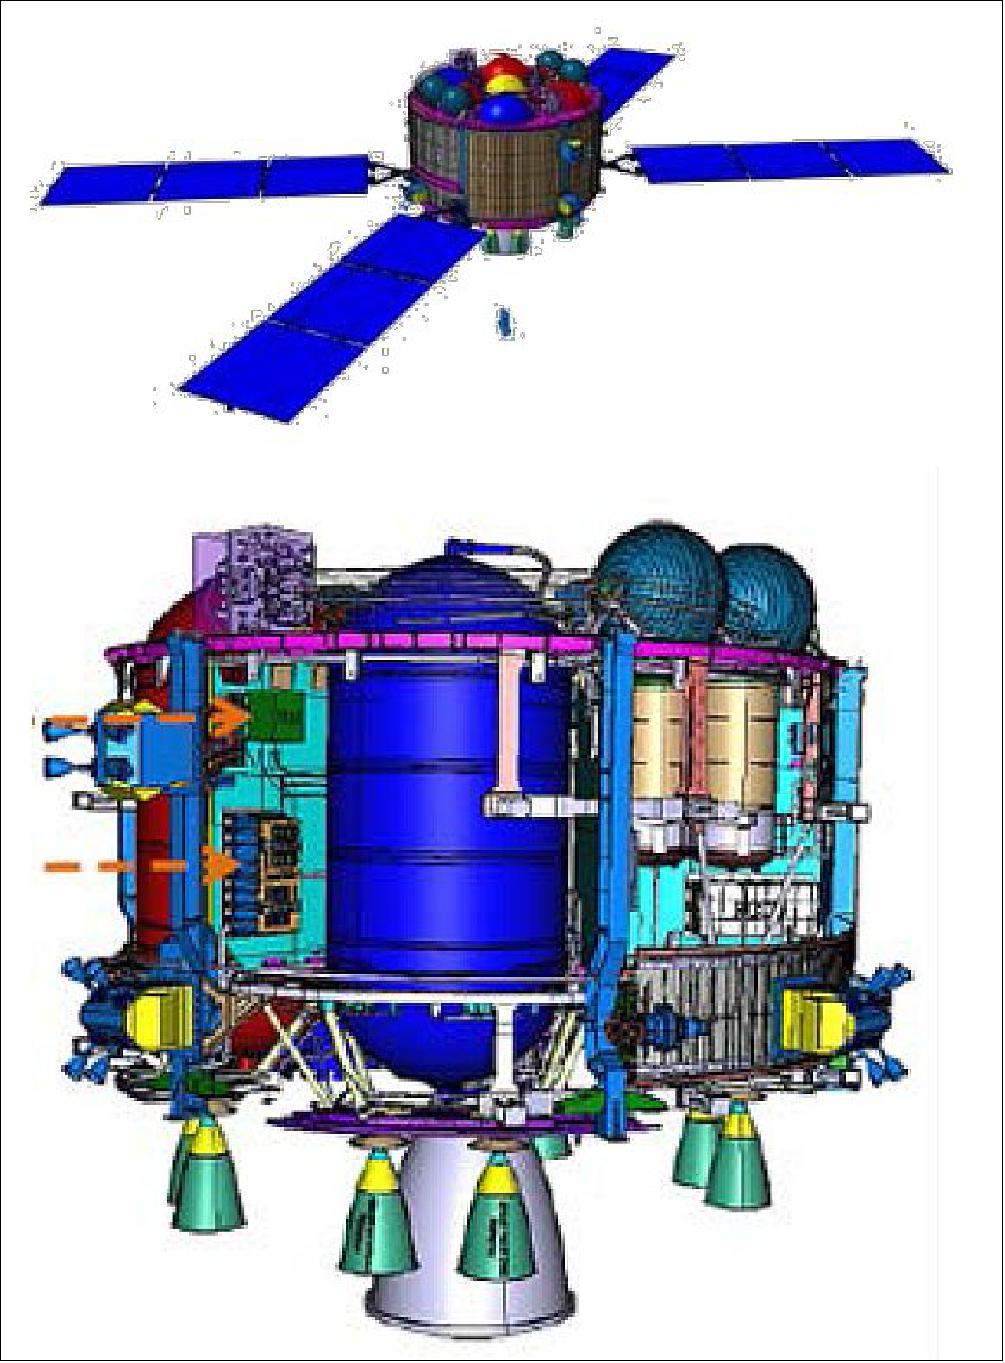 Figure 16: Illustration of the ESM (European Service Module) without radiators and MDPS, image credit: ESA, Airbus DS